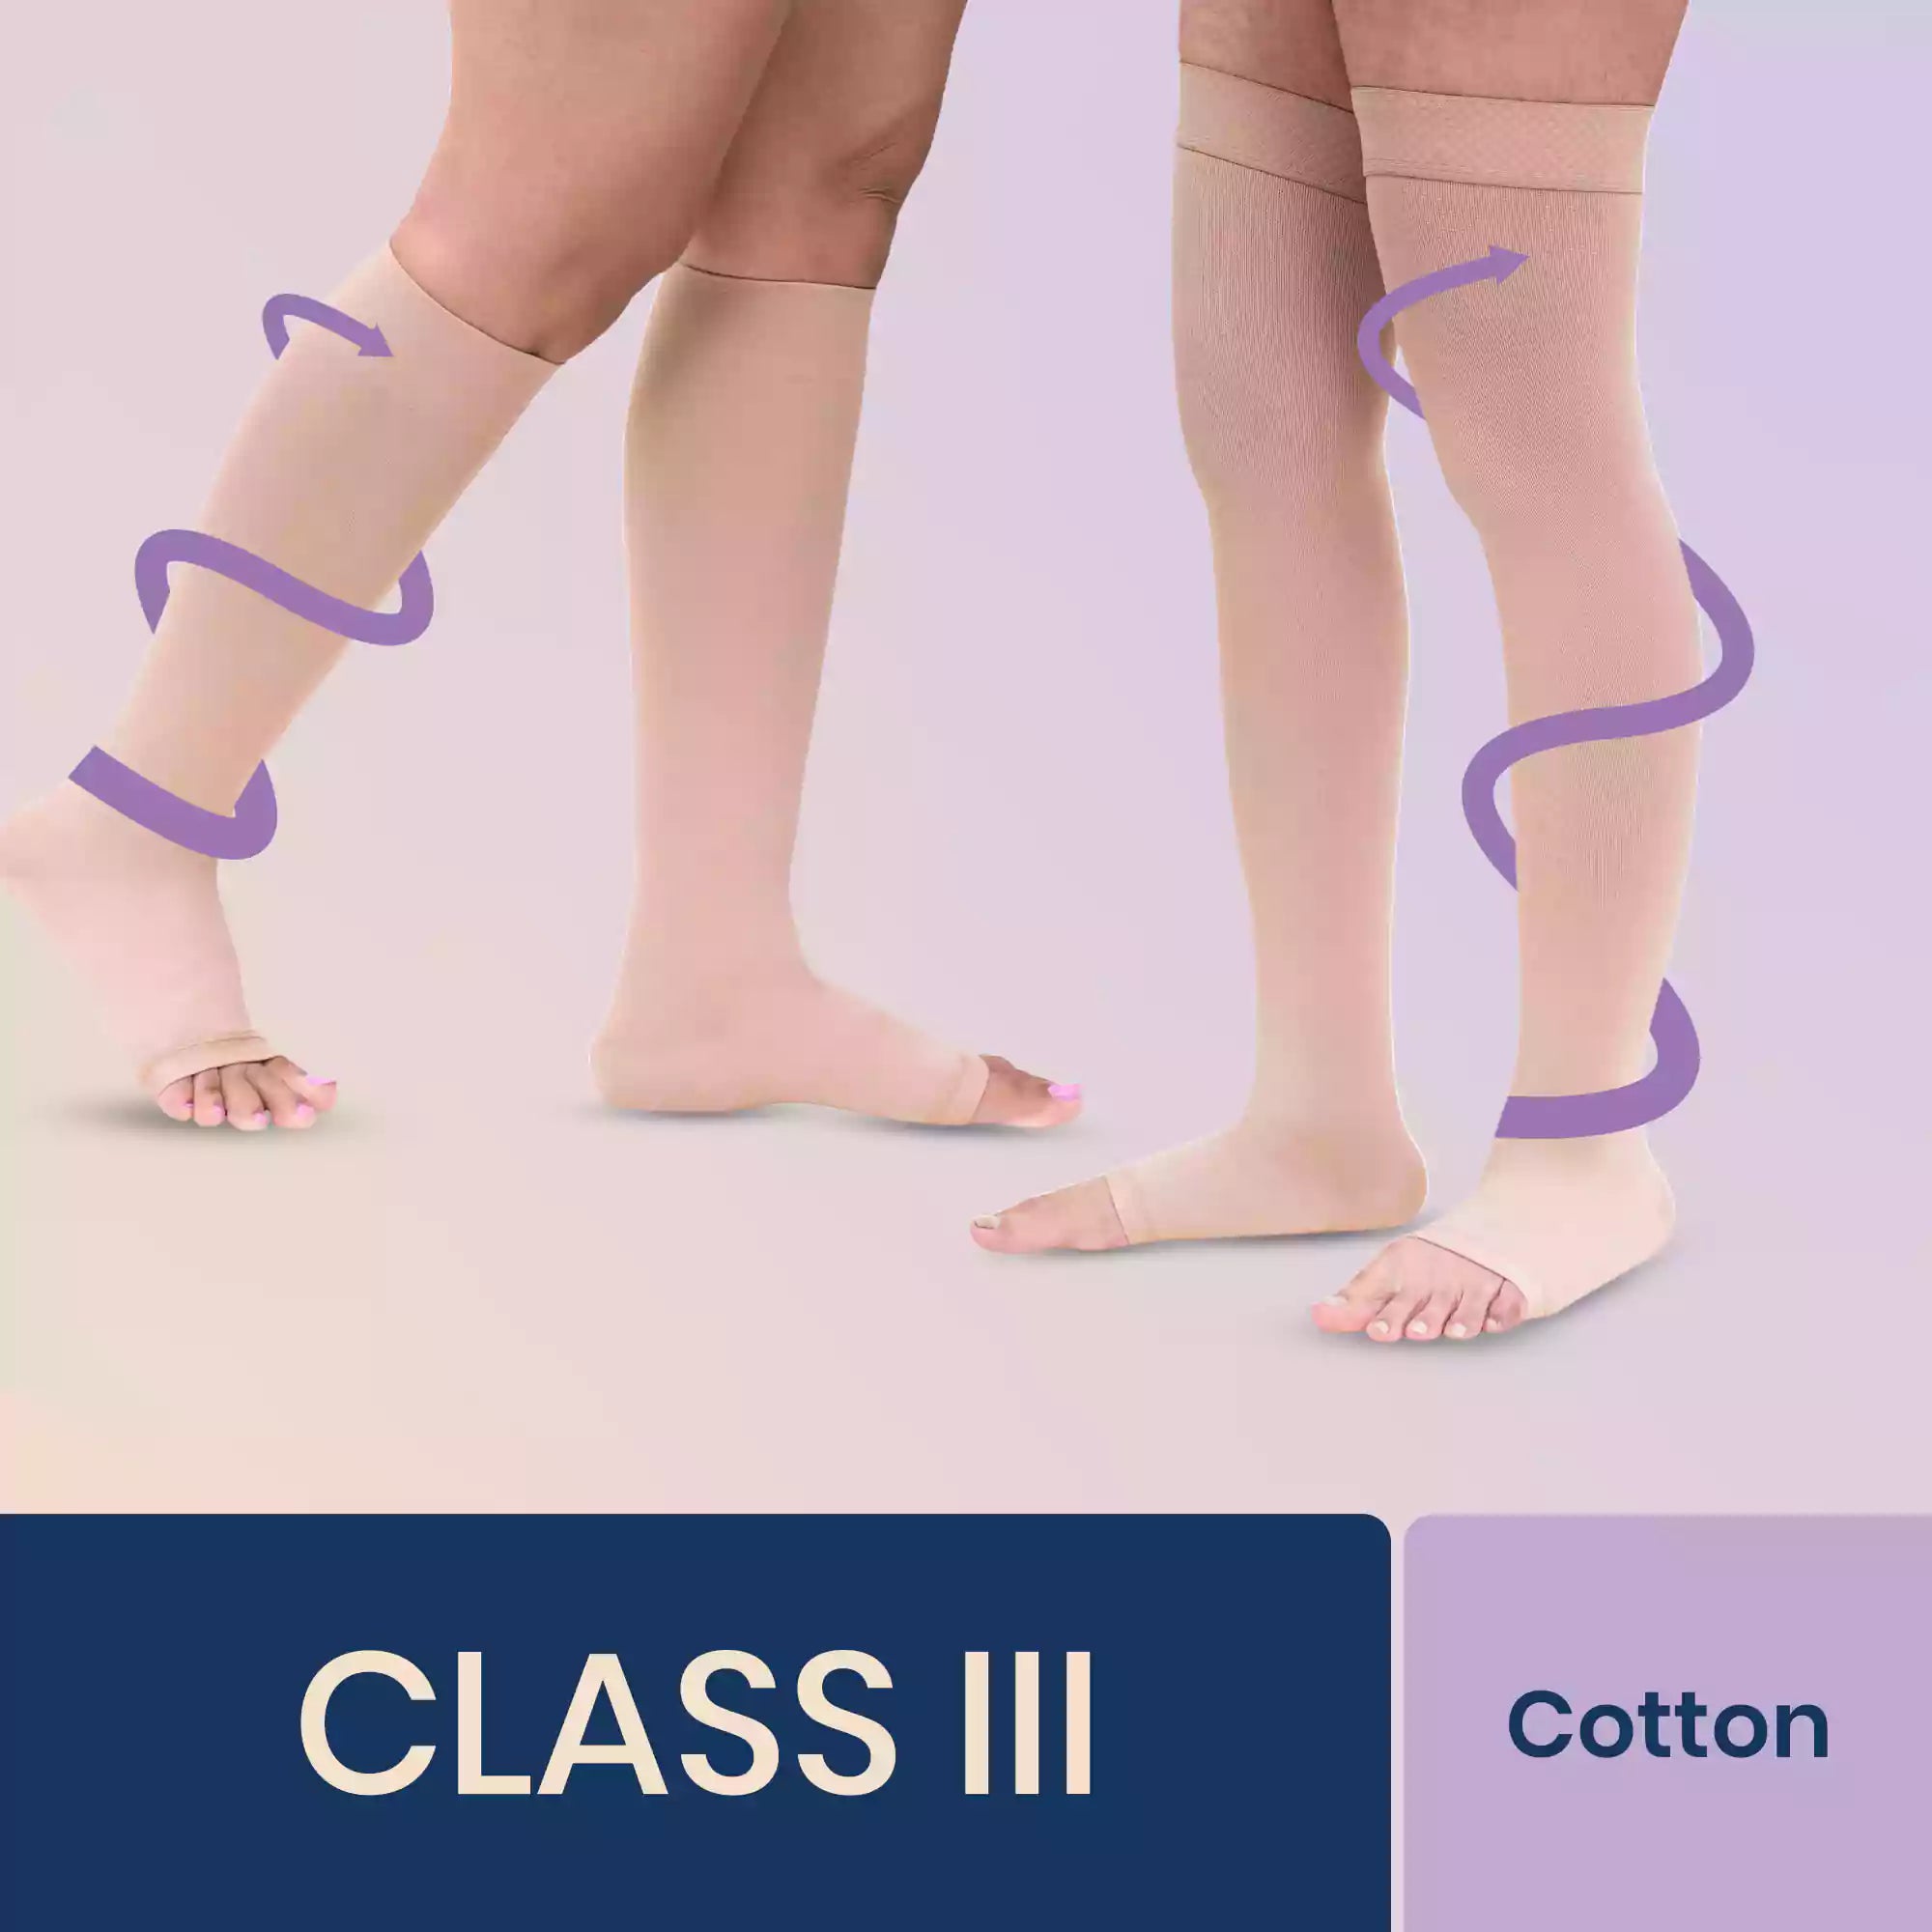 Medical Compression Stockings Below Knee Dvt Online in India